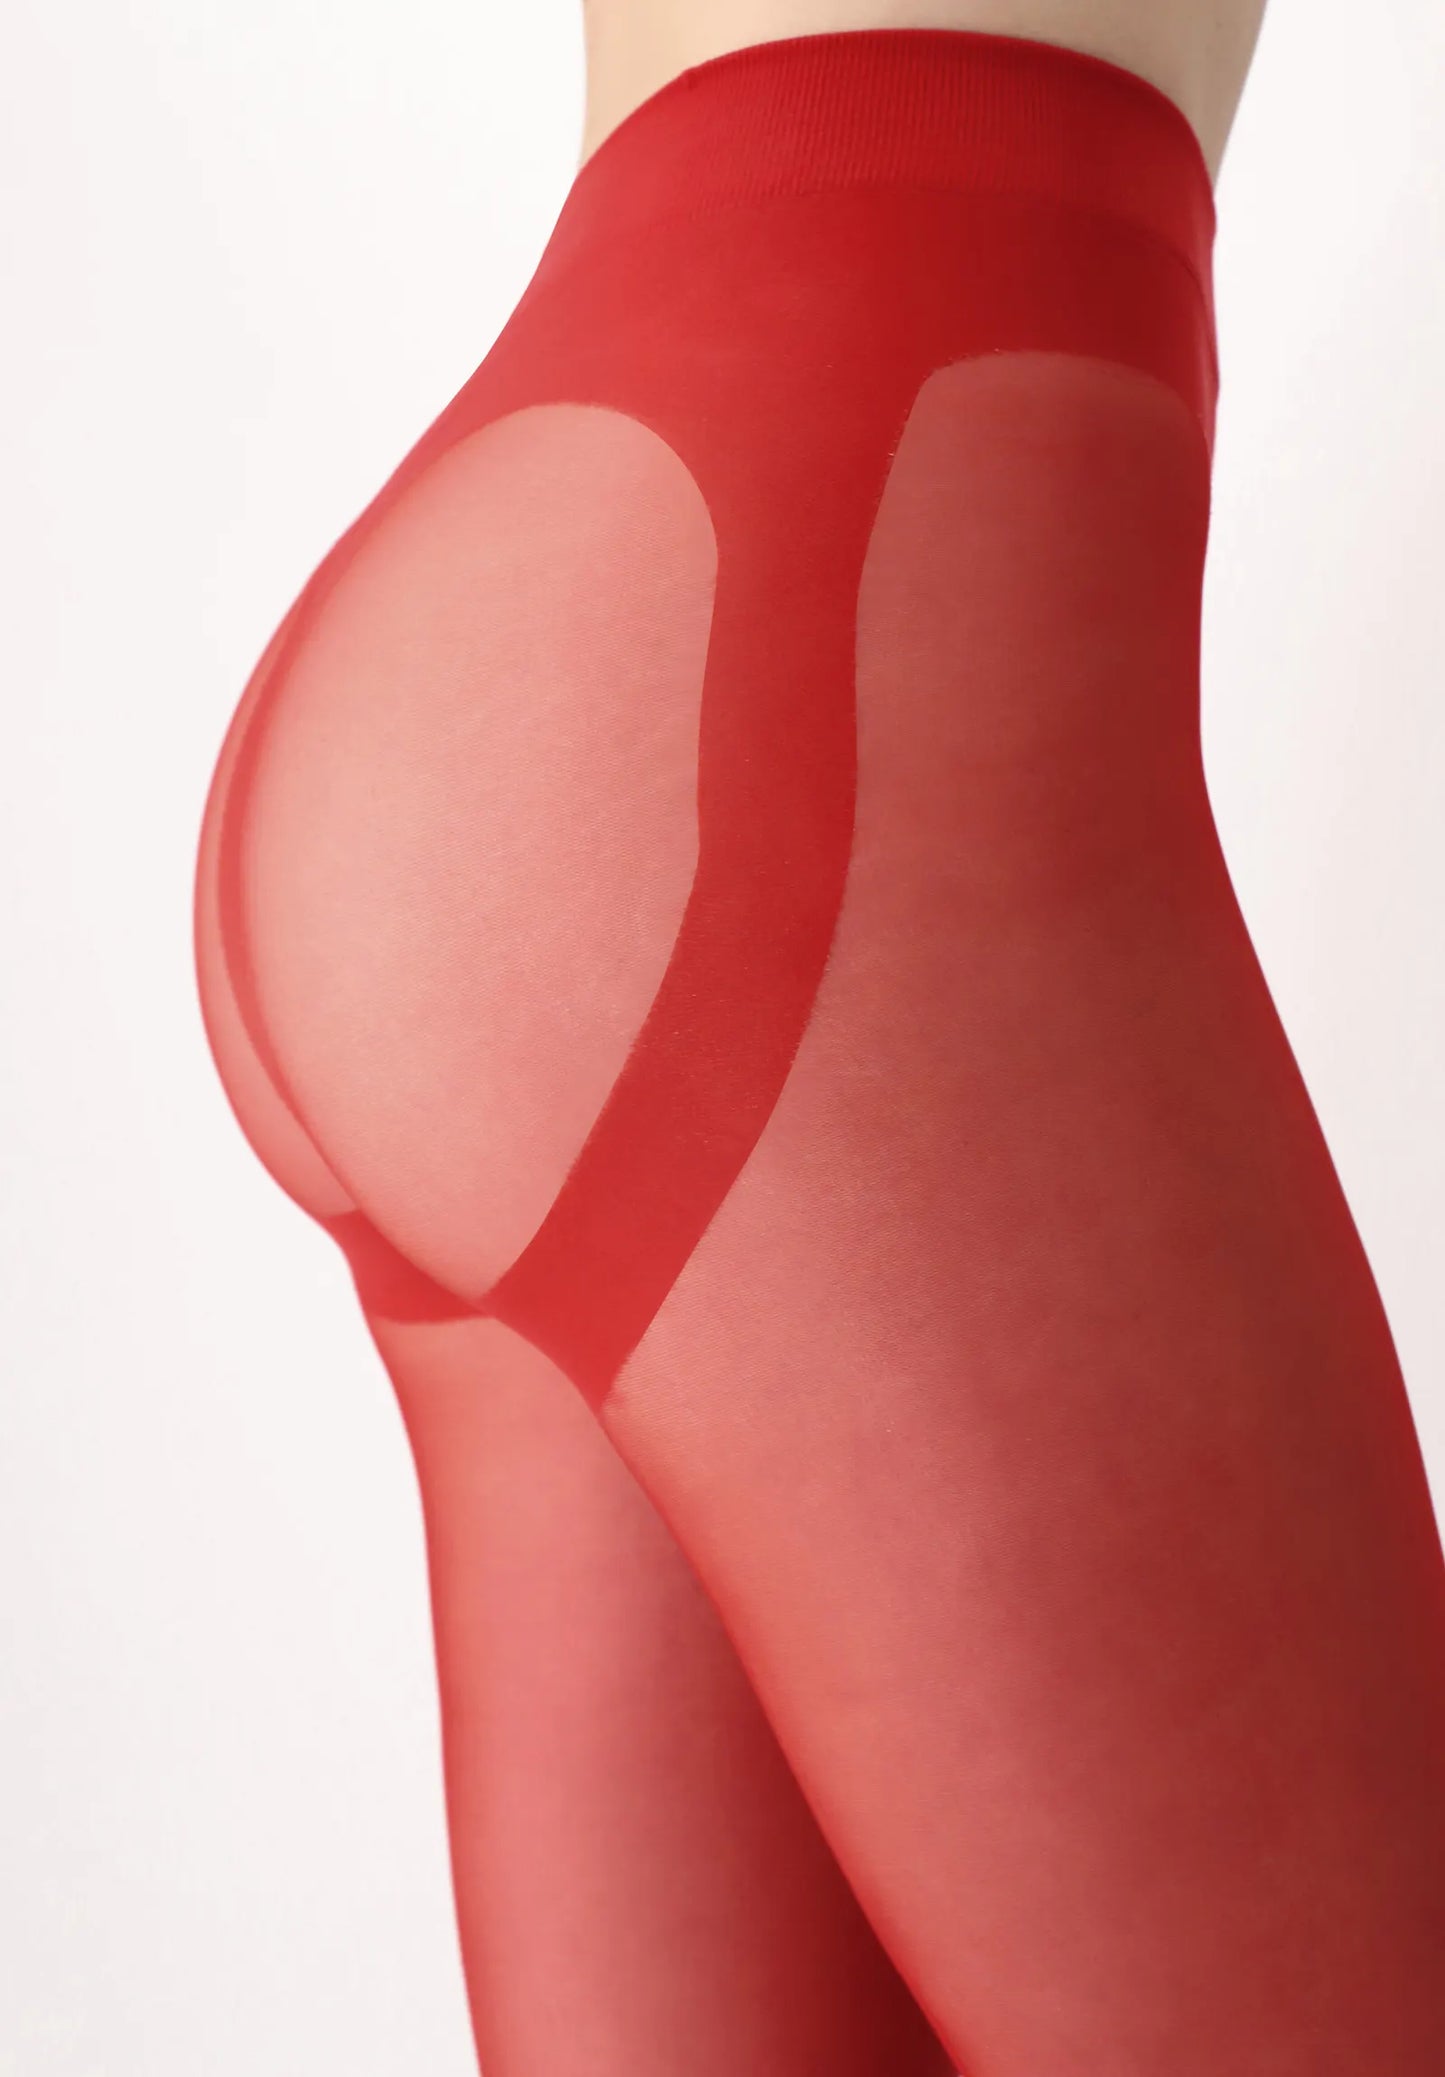 Oroblù Shock Up Line Collant - Sheer red tights with a back-seam, shaping push-up panty control-top